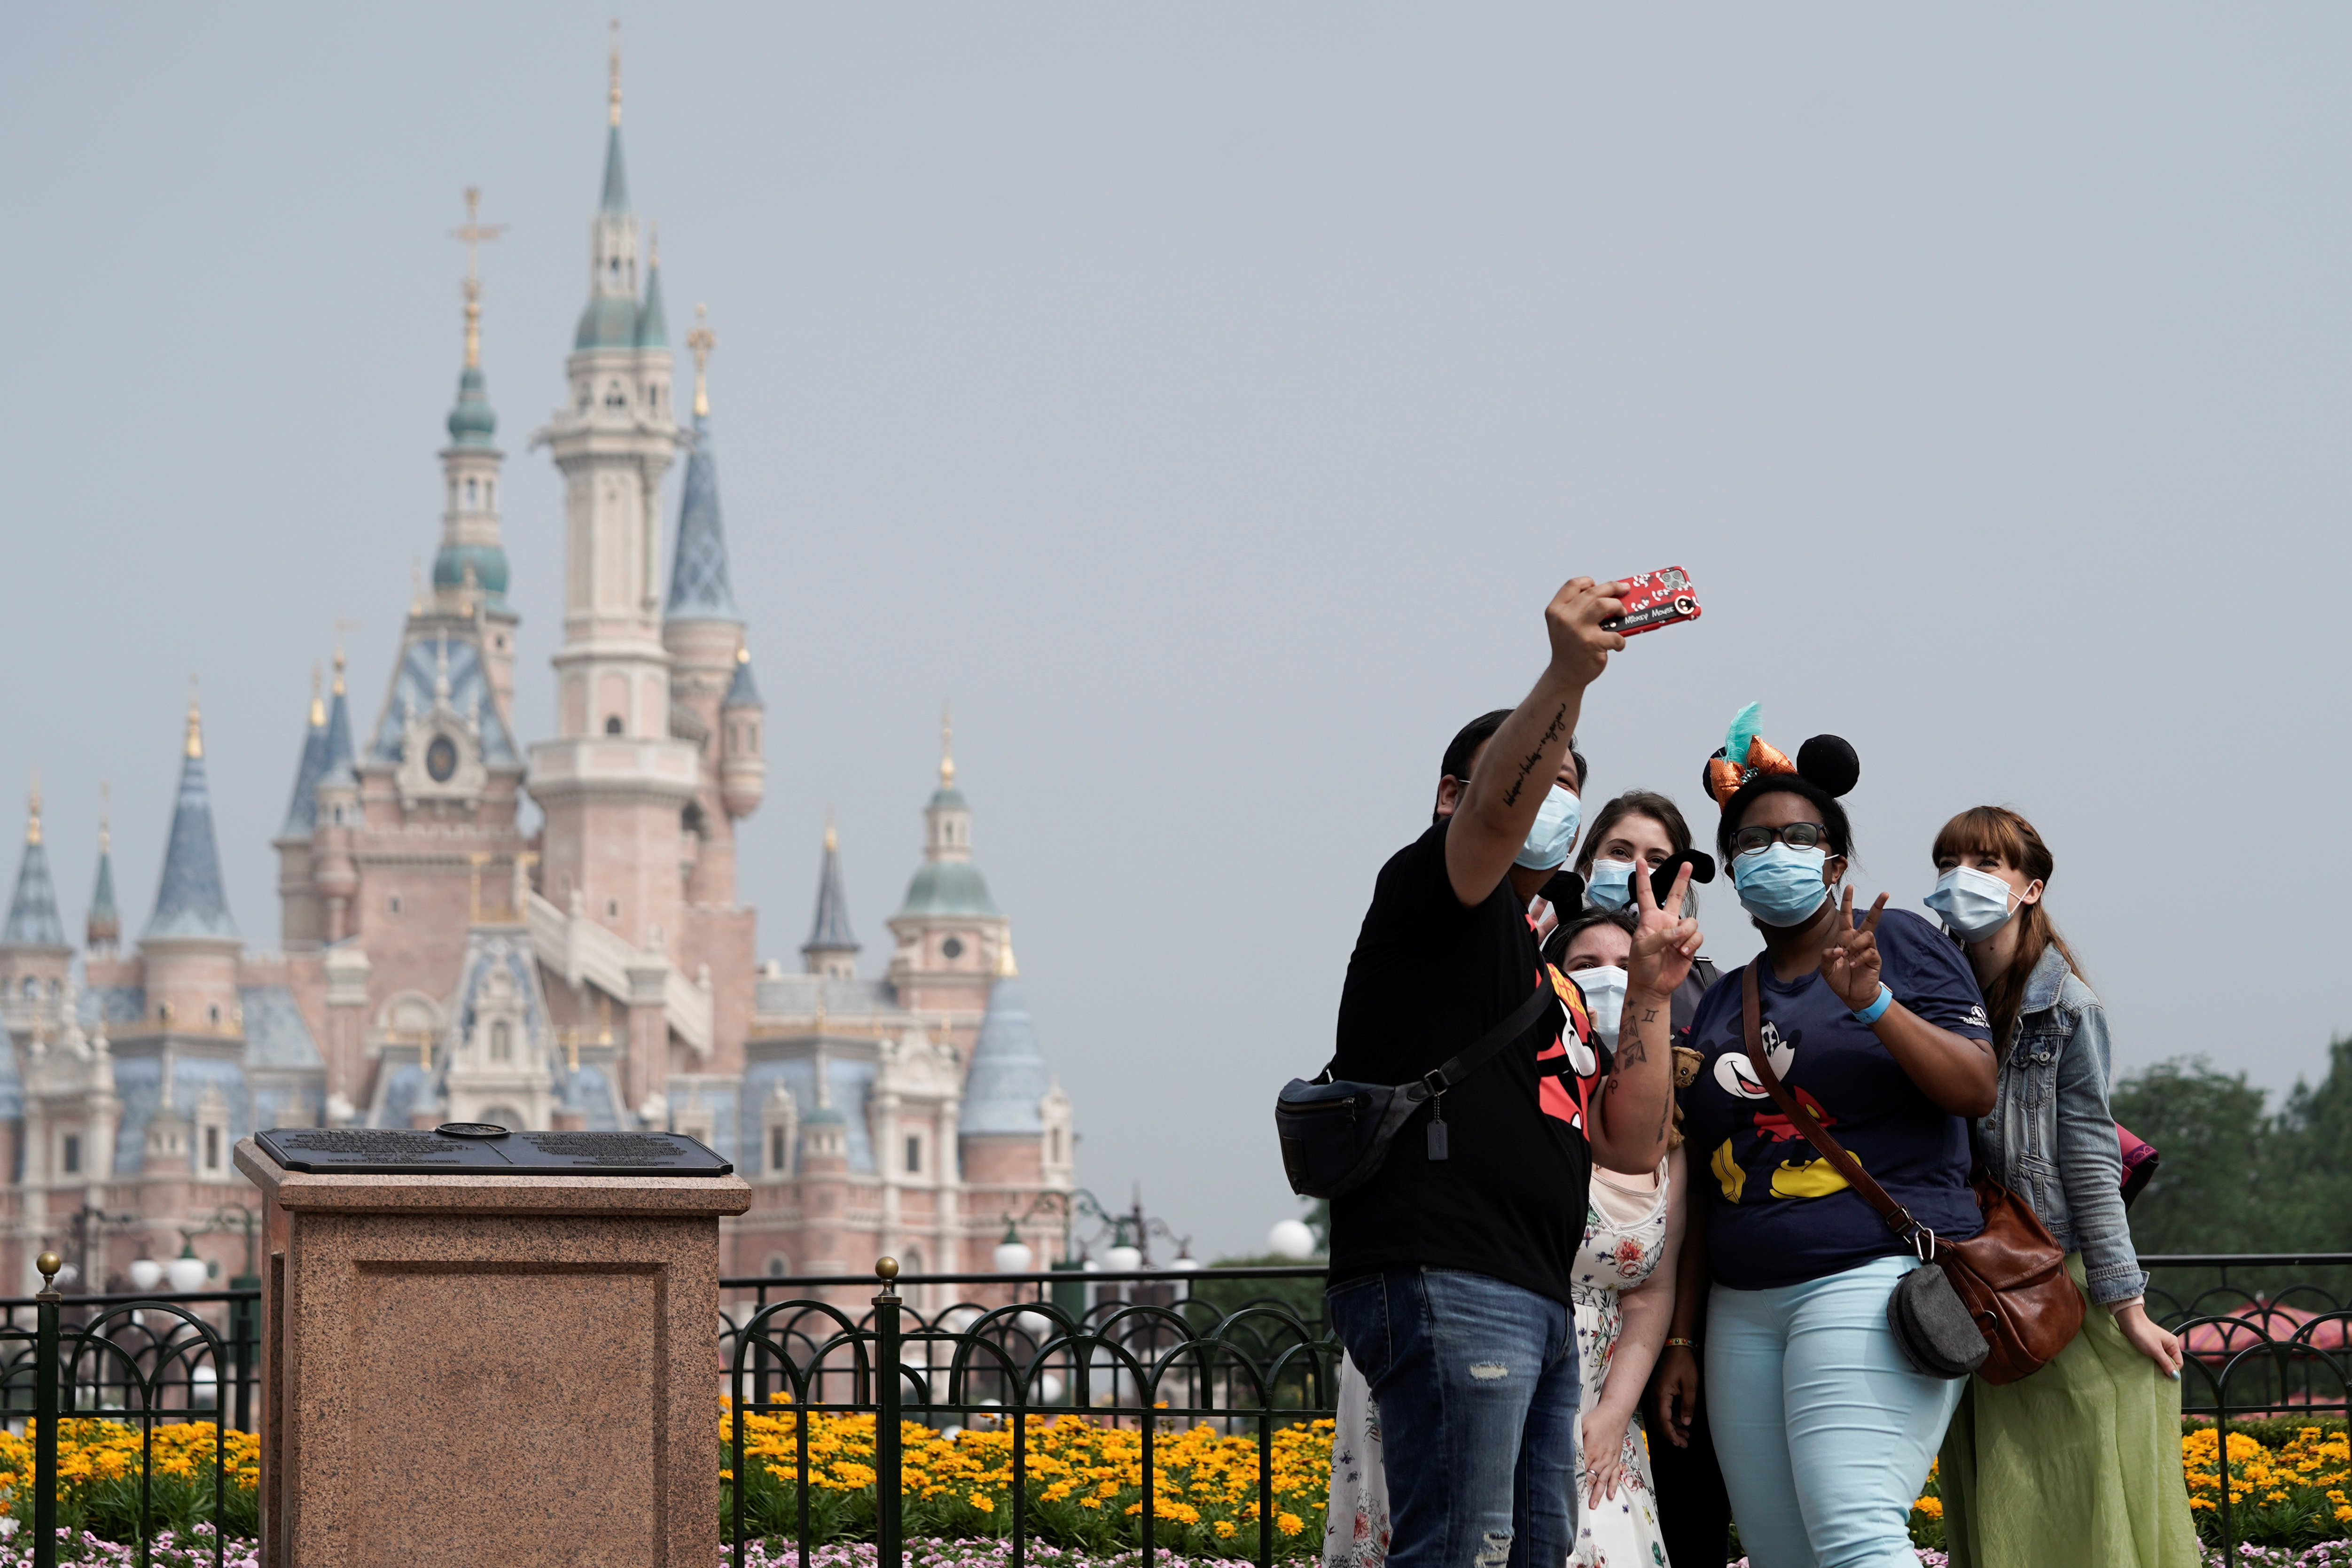 Visitors wearing protective face masks pose for a picture at Shanghai Disney Resort as the Shanghai Disneyland theme park reopens following a shutdown due to the coronavirus disease (COVID-19) outbreak, in Shanghai